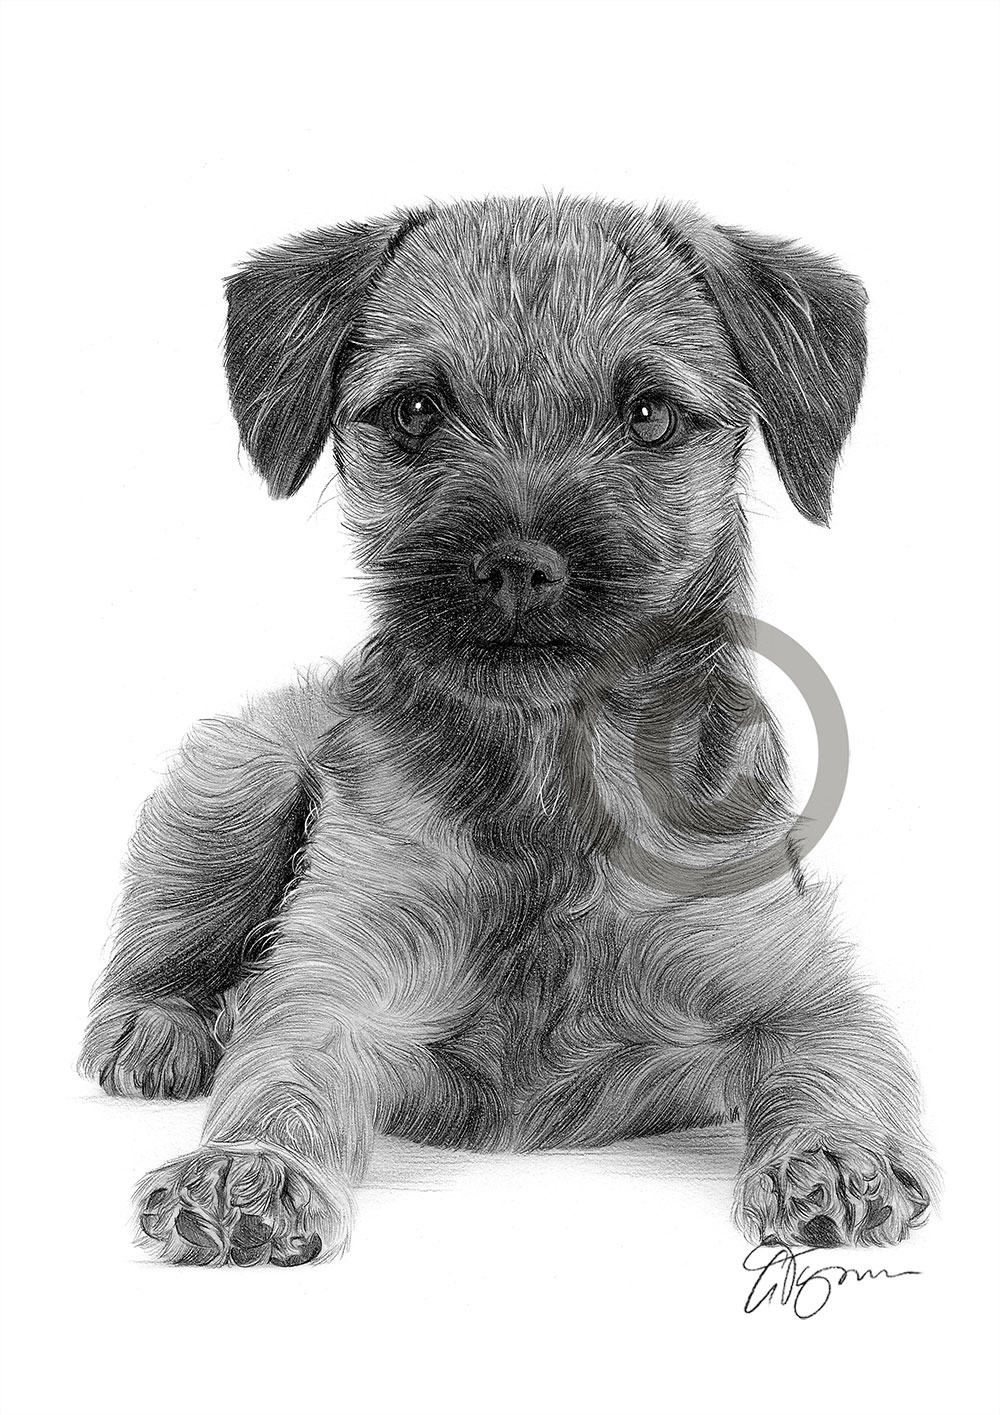 Pencil drawing of a Border Terrier puppy by artist Gary Tymon